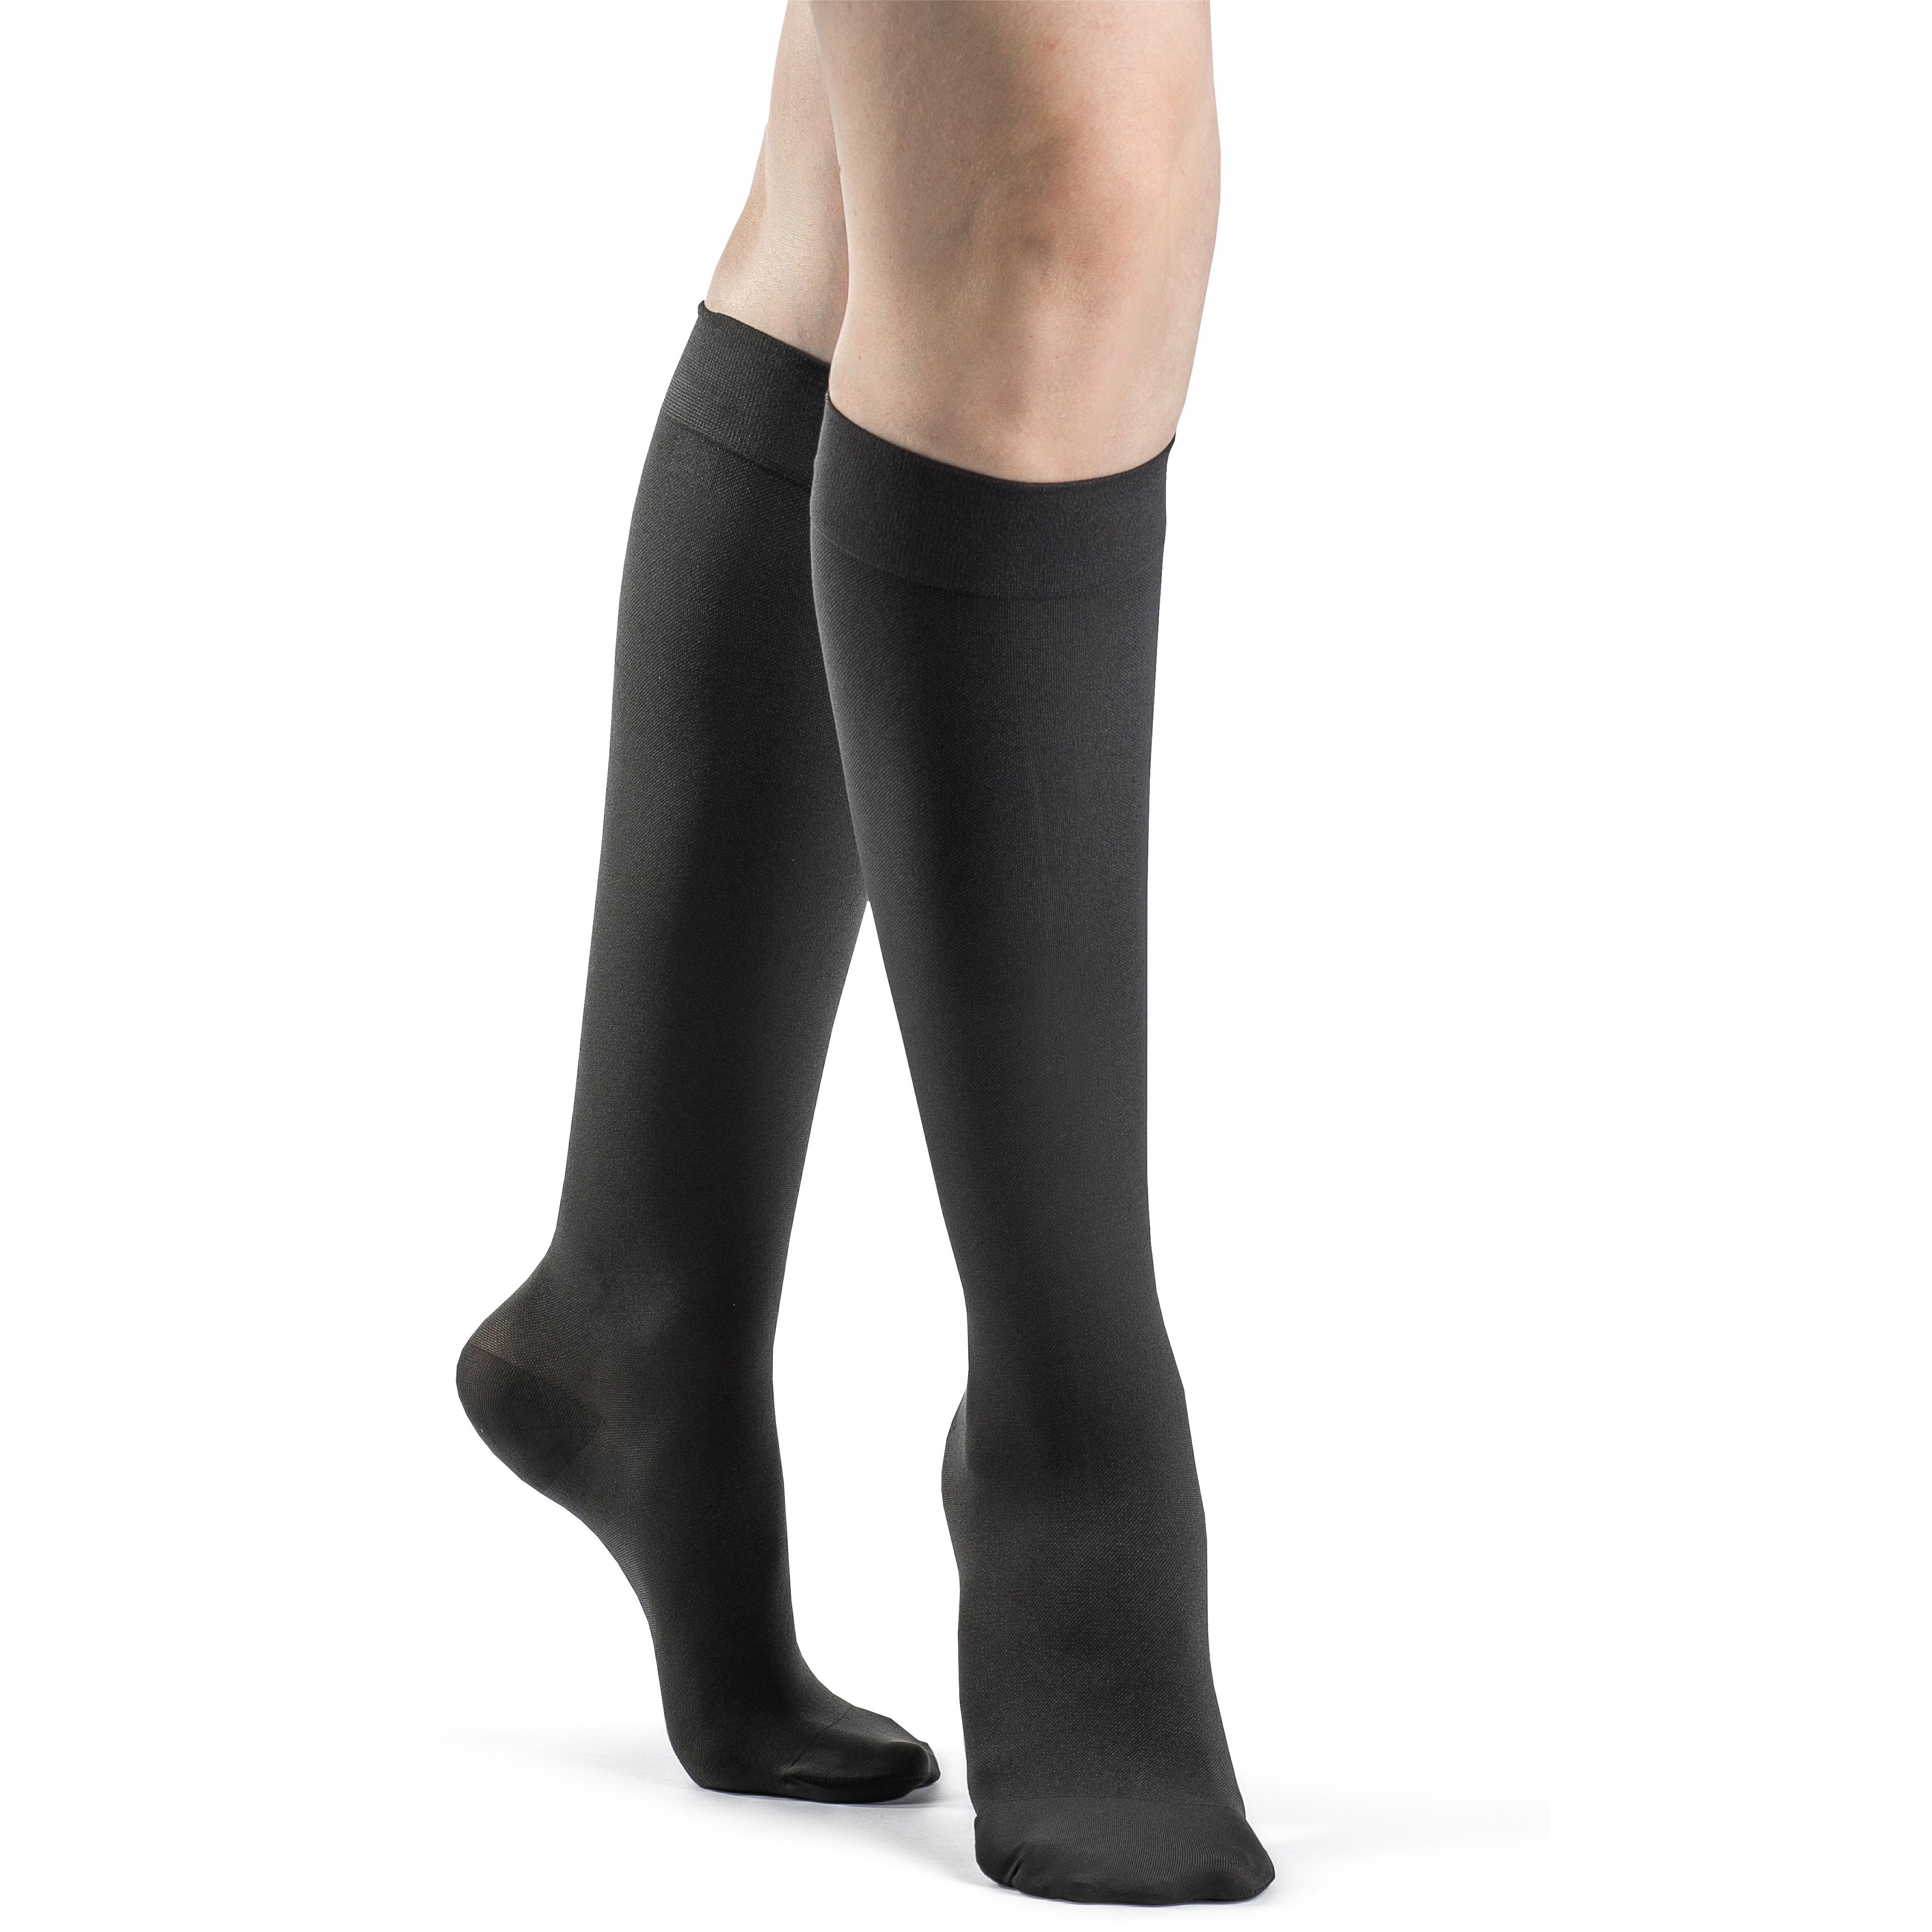 Sigvaris Soft Opaque Women's Knee High 15-20 mmHg – Compression Store